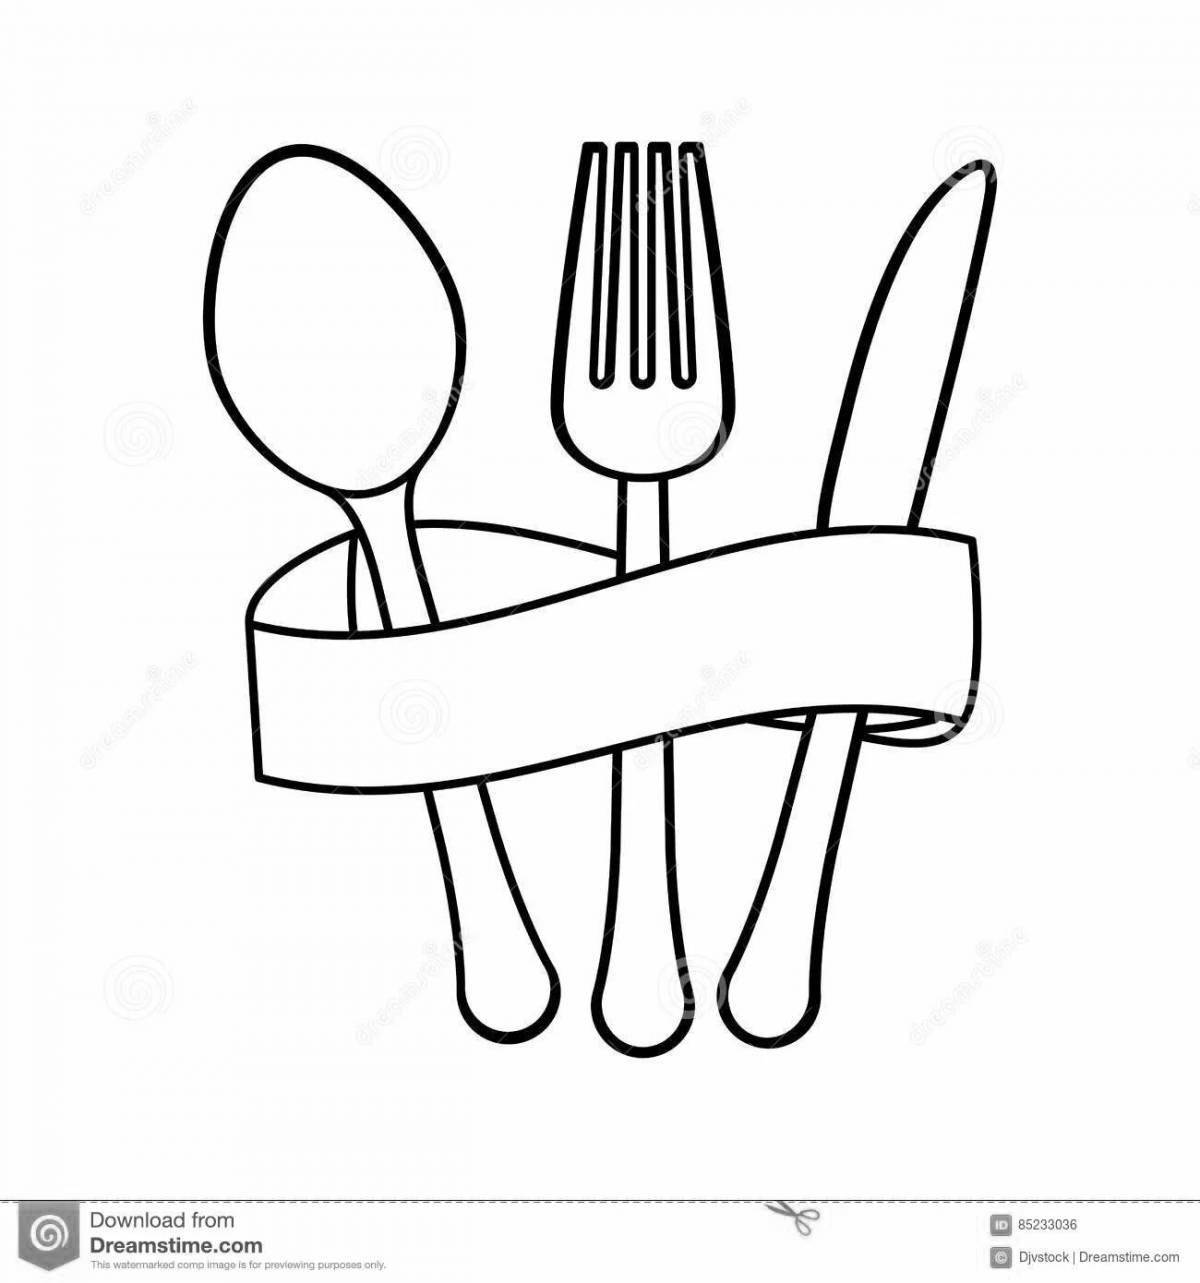 Shine cutlery coloring page for students